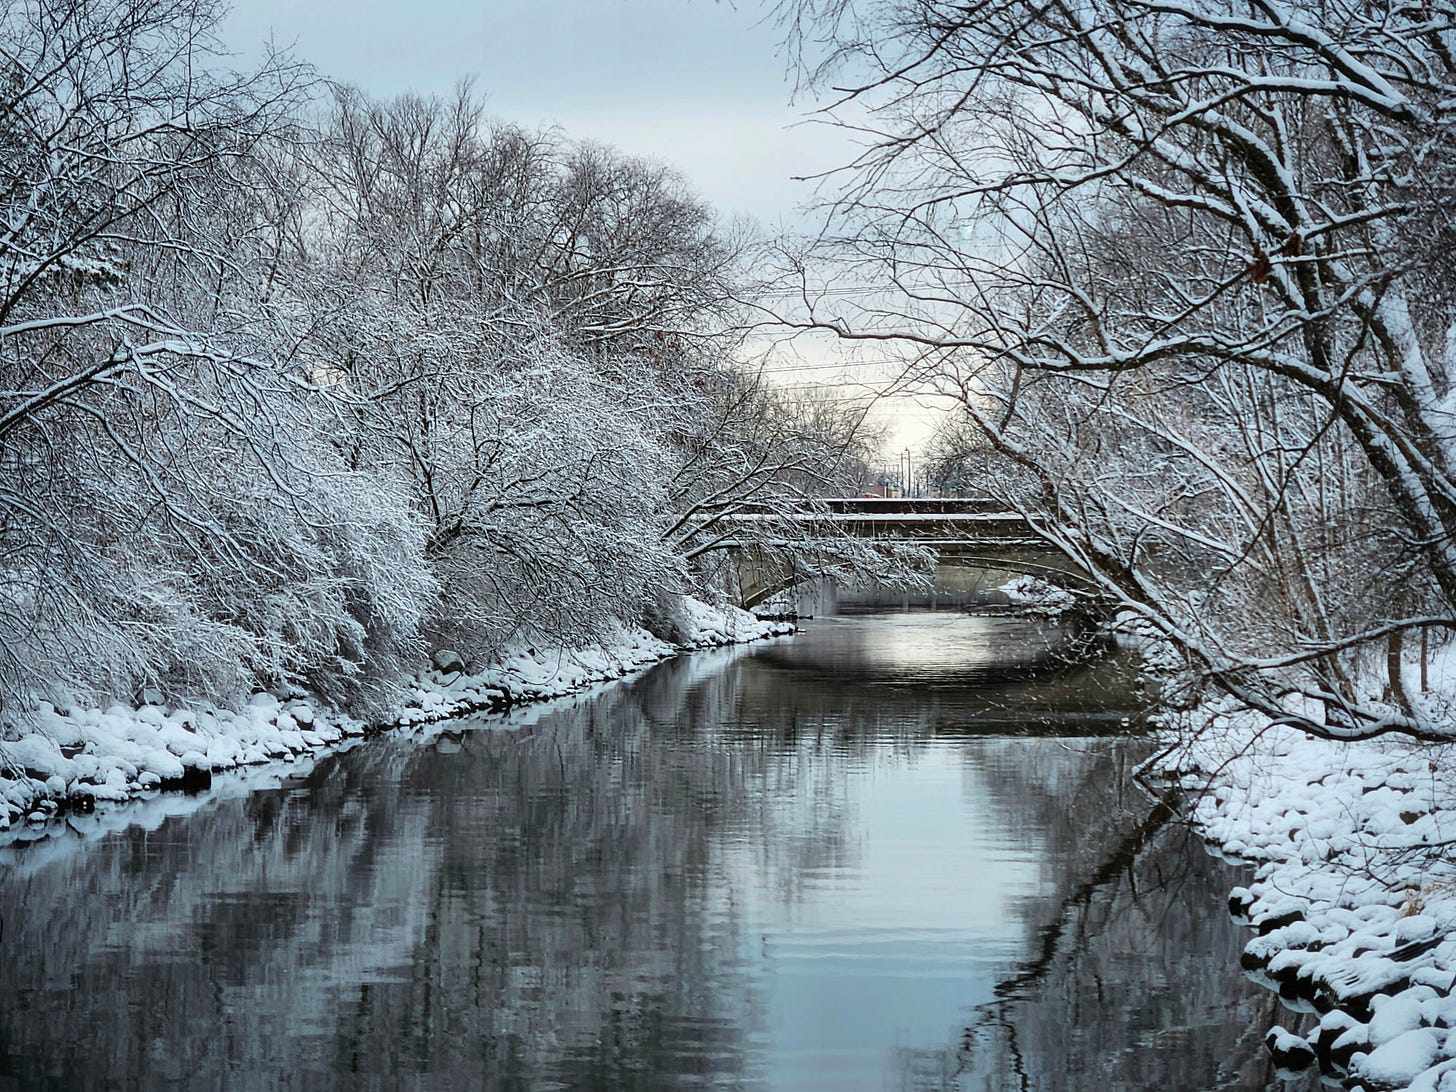 Black, mostly smooth water of a narrow river flows between snow-covered, rocky stream banks. Trees curve over the waterway, also covered in fluffy white snow. A bridge spans the water in the distance.